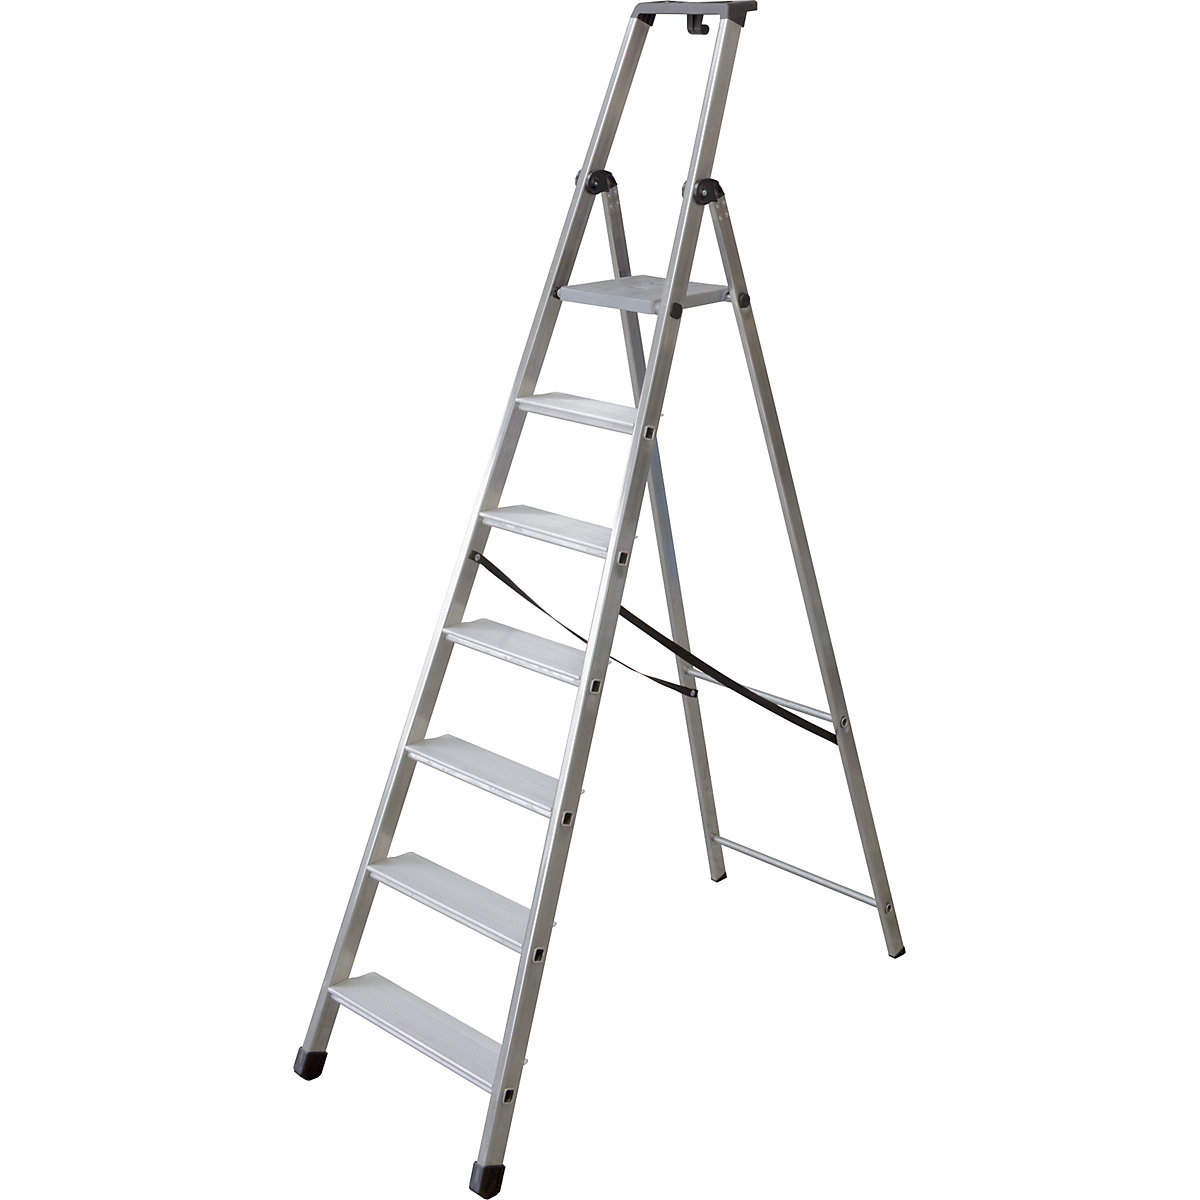 Step ladder, single sided access with extra deep steps, 7 steps incl. platform-3